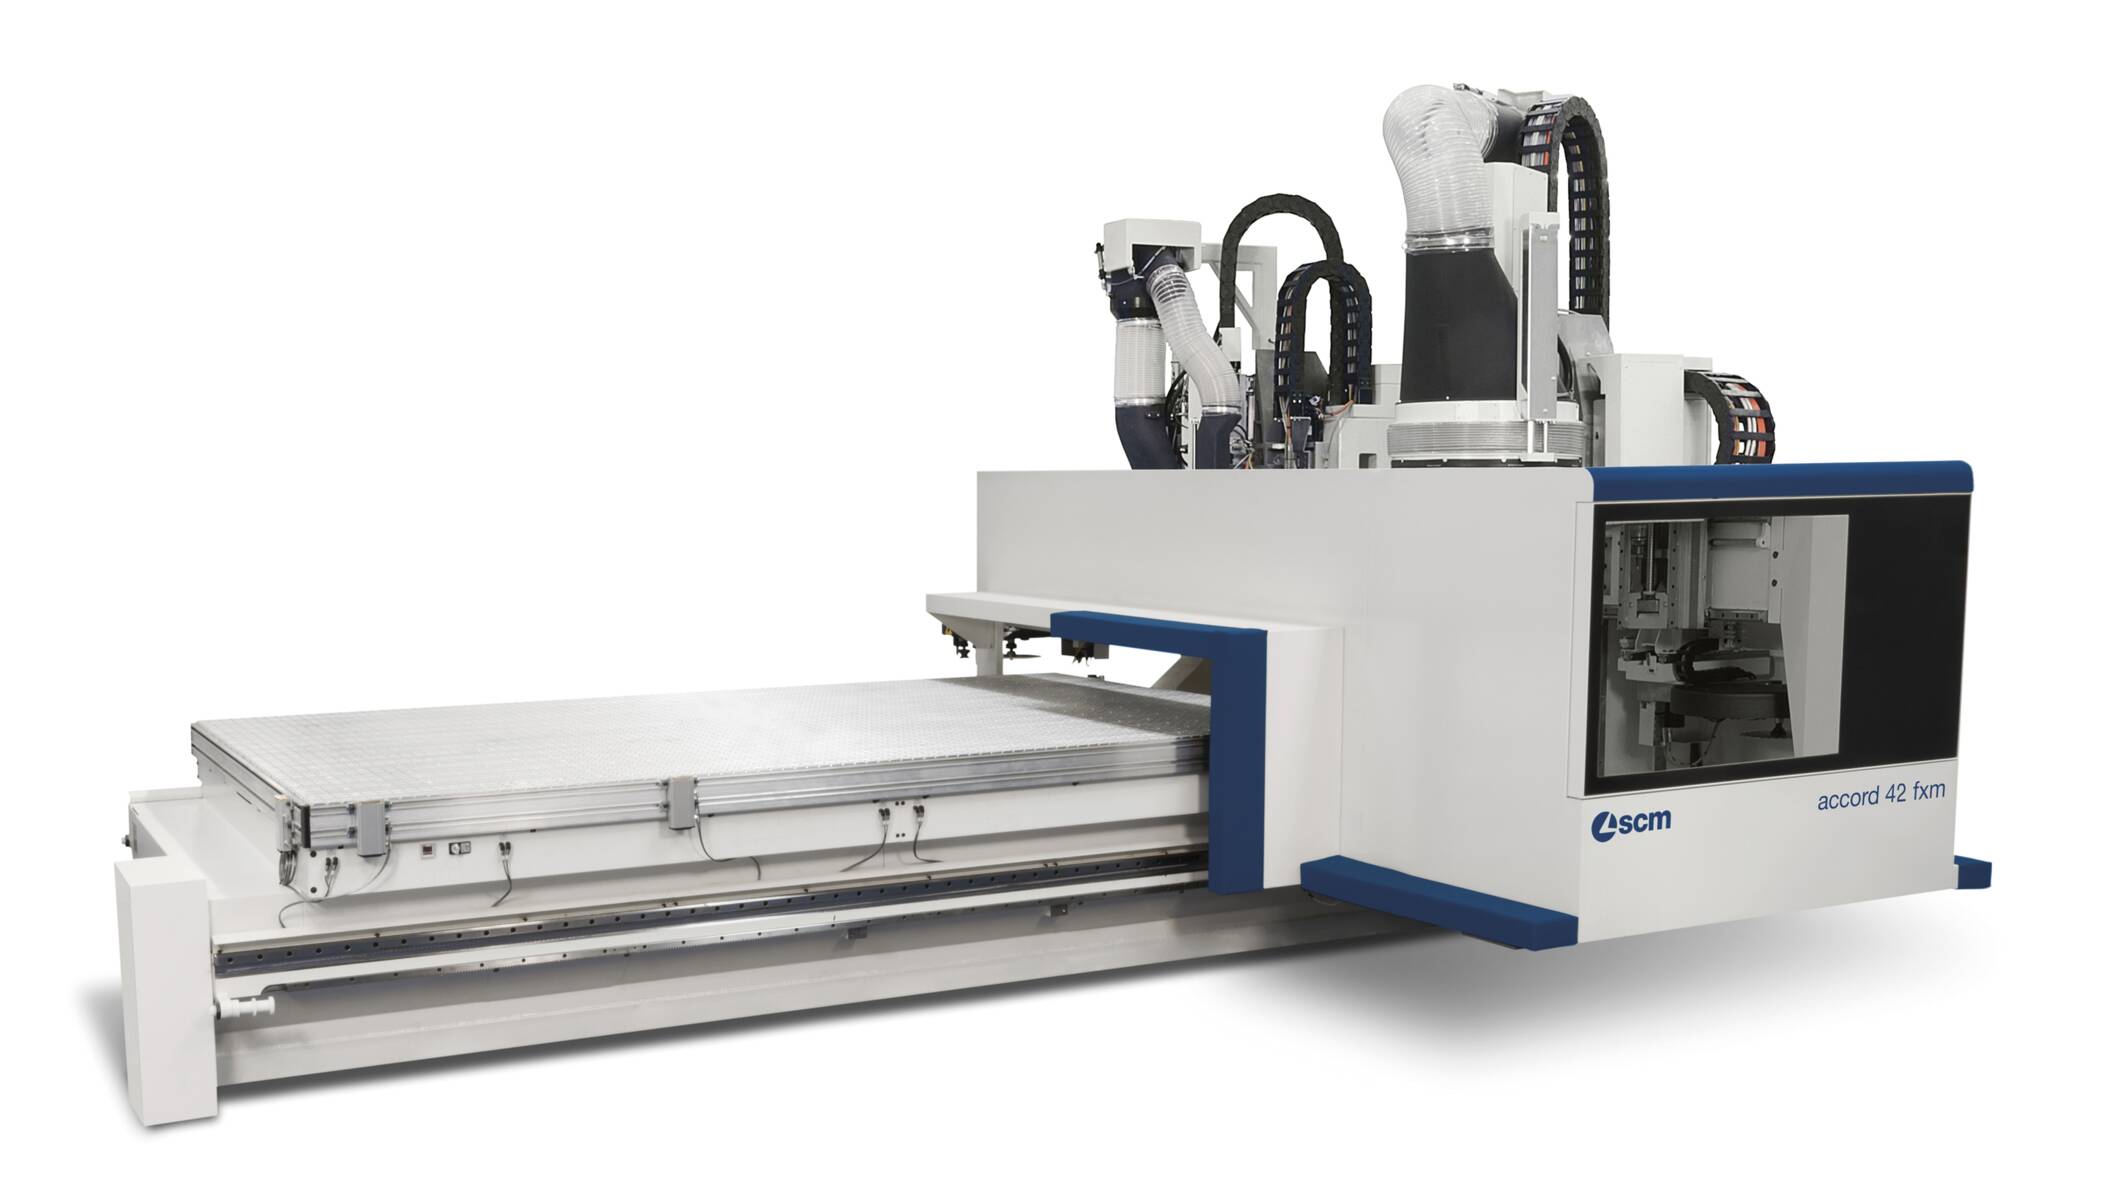 CNC Machining Centers - CNC Nesting Machining Centers for routing and drilling - accord 42 fxm